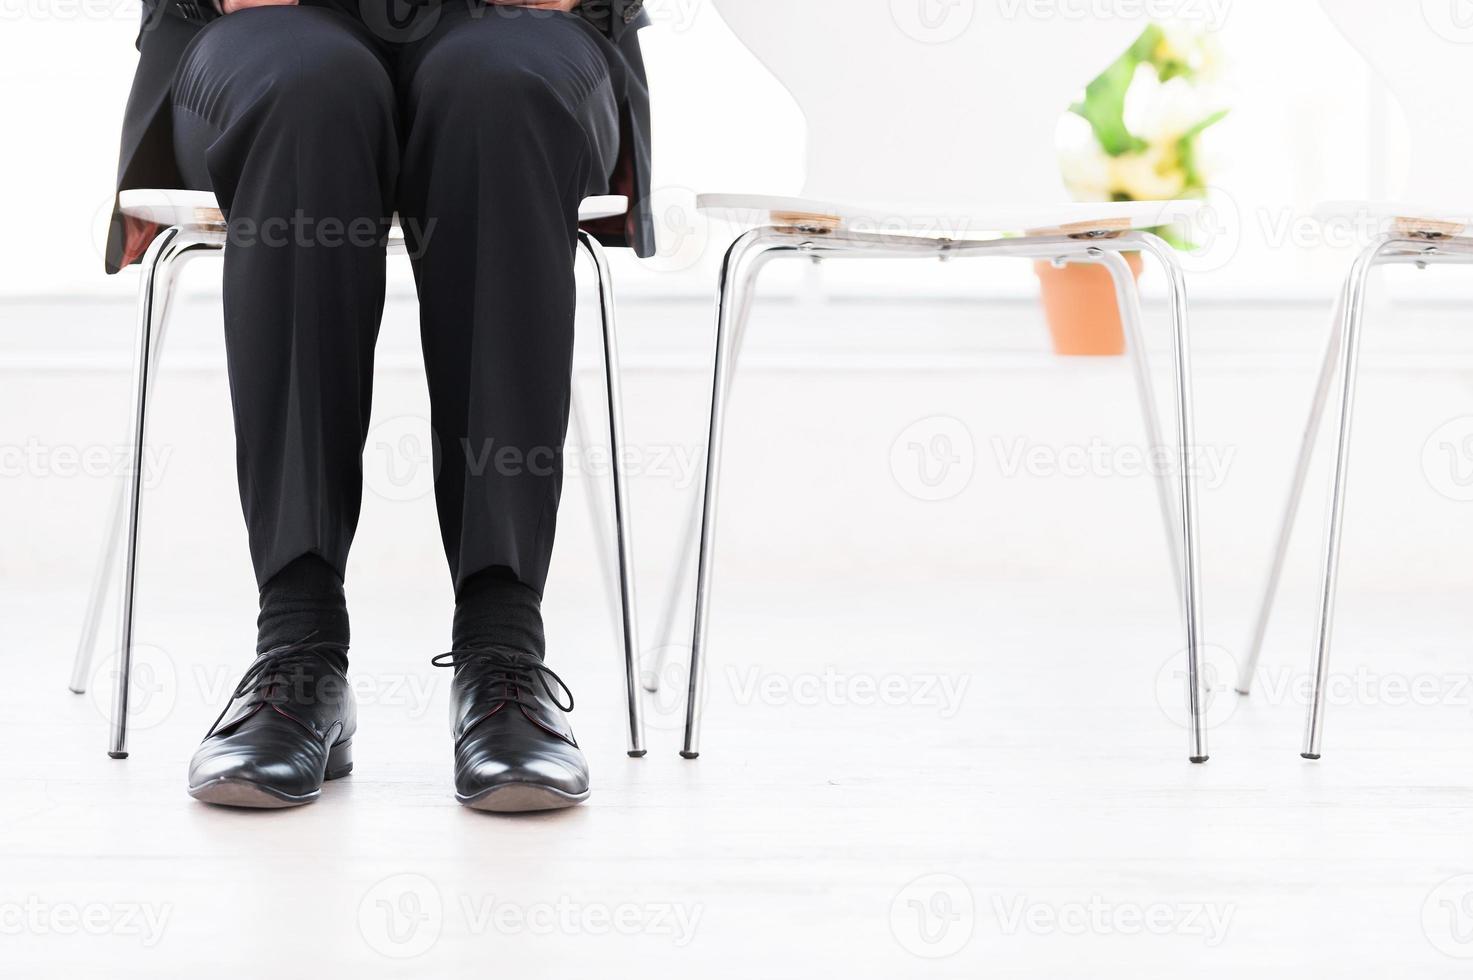 Waiting for interview. Cropped image of man in formalwear sitting at the chair with other chairs standing in a row photo